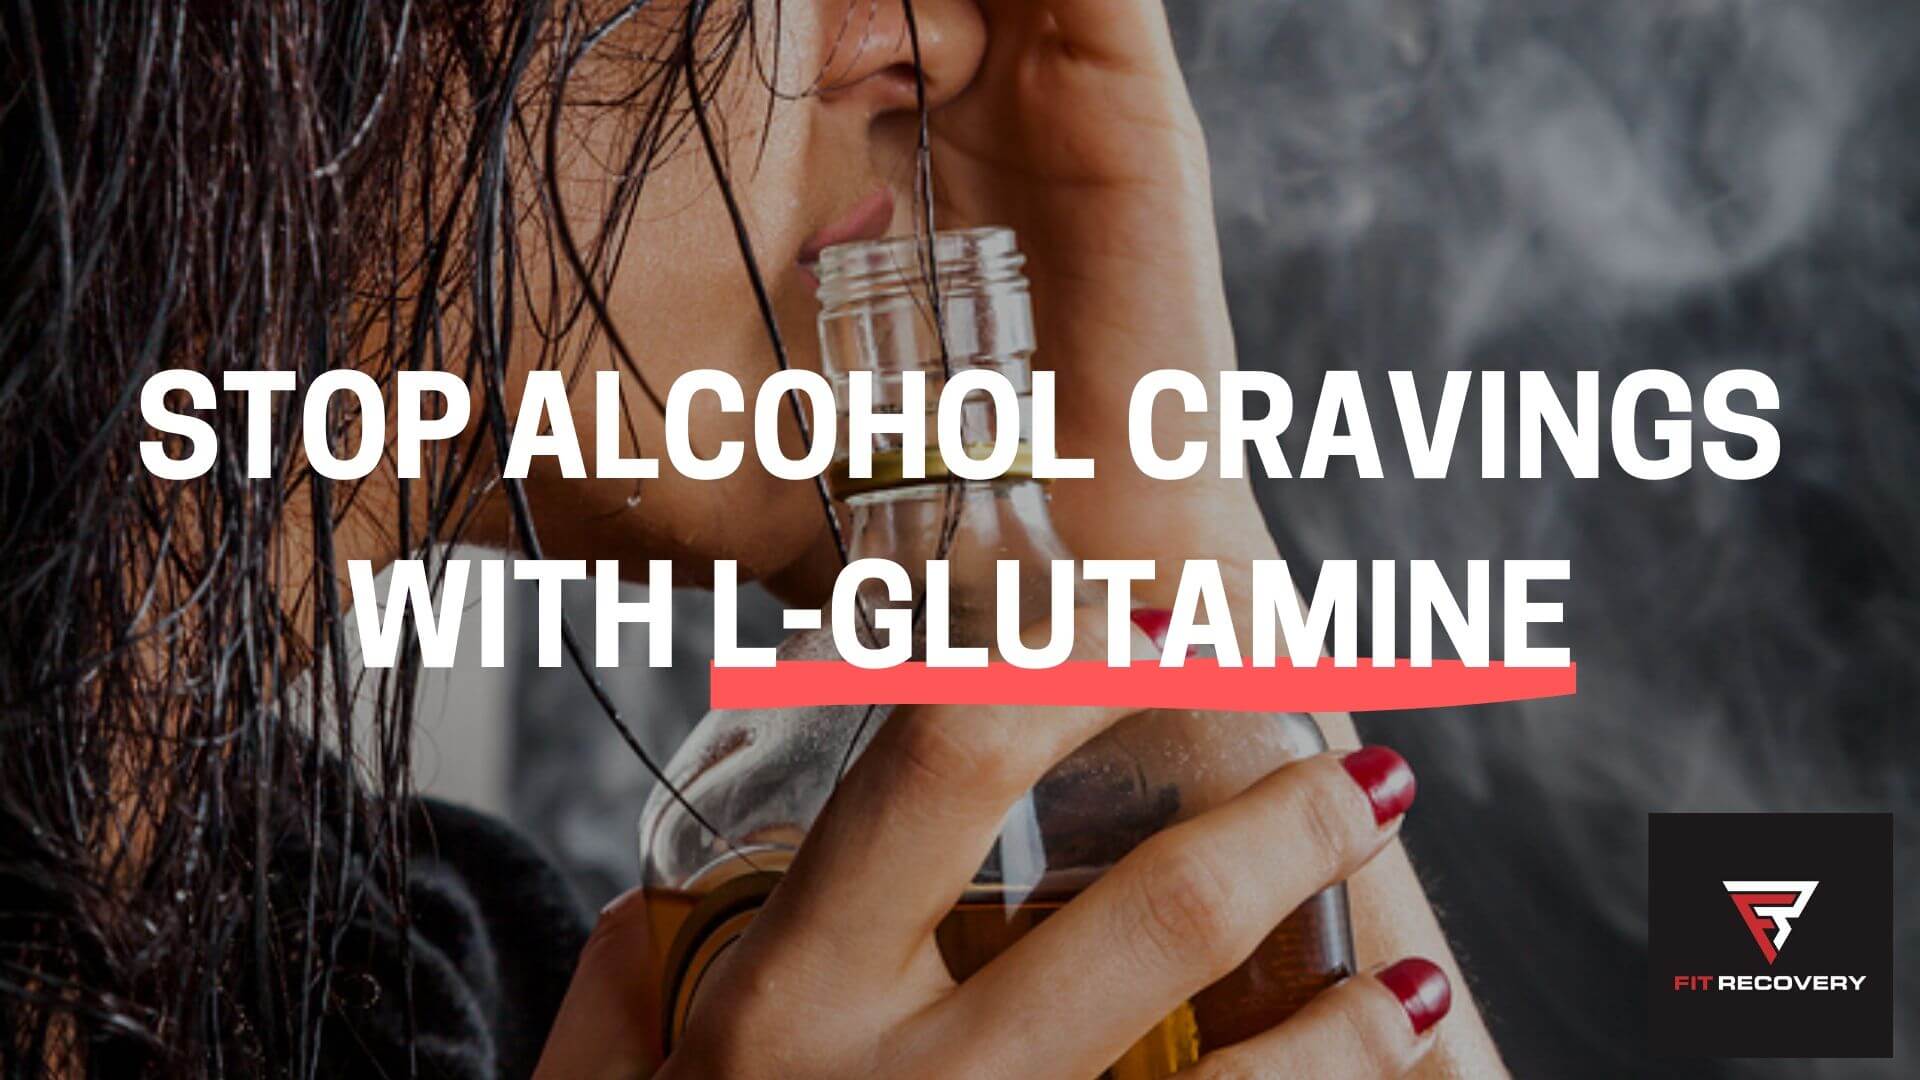 How to Use L-Glutamine for Alcohol Cravings | Fit Recovery